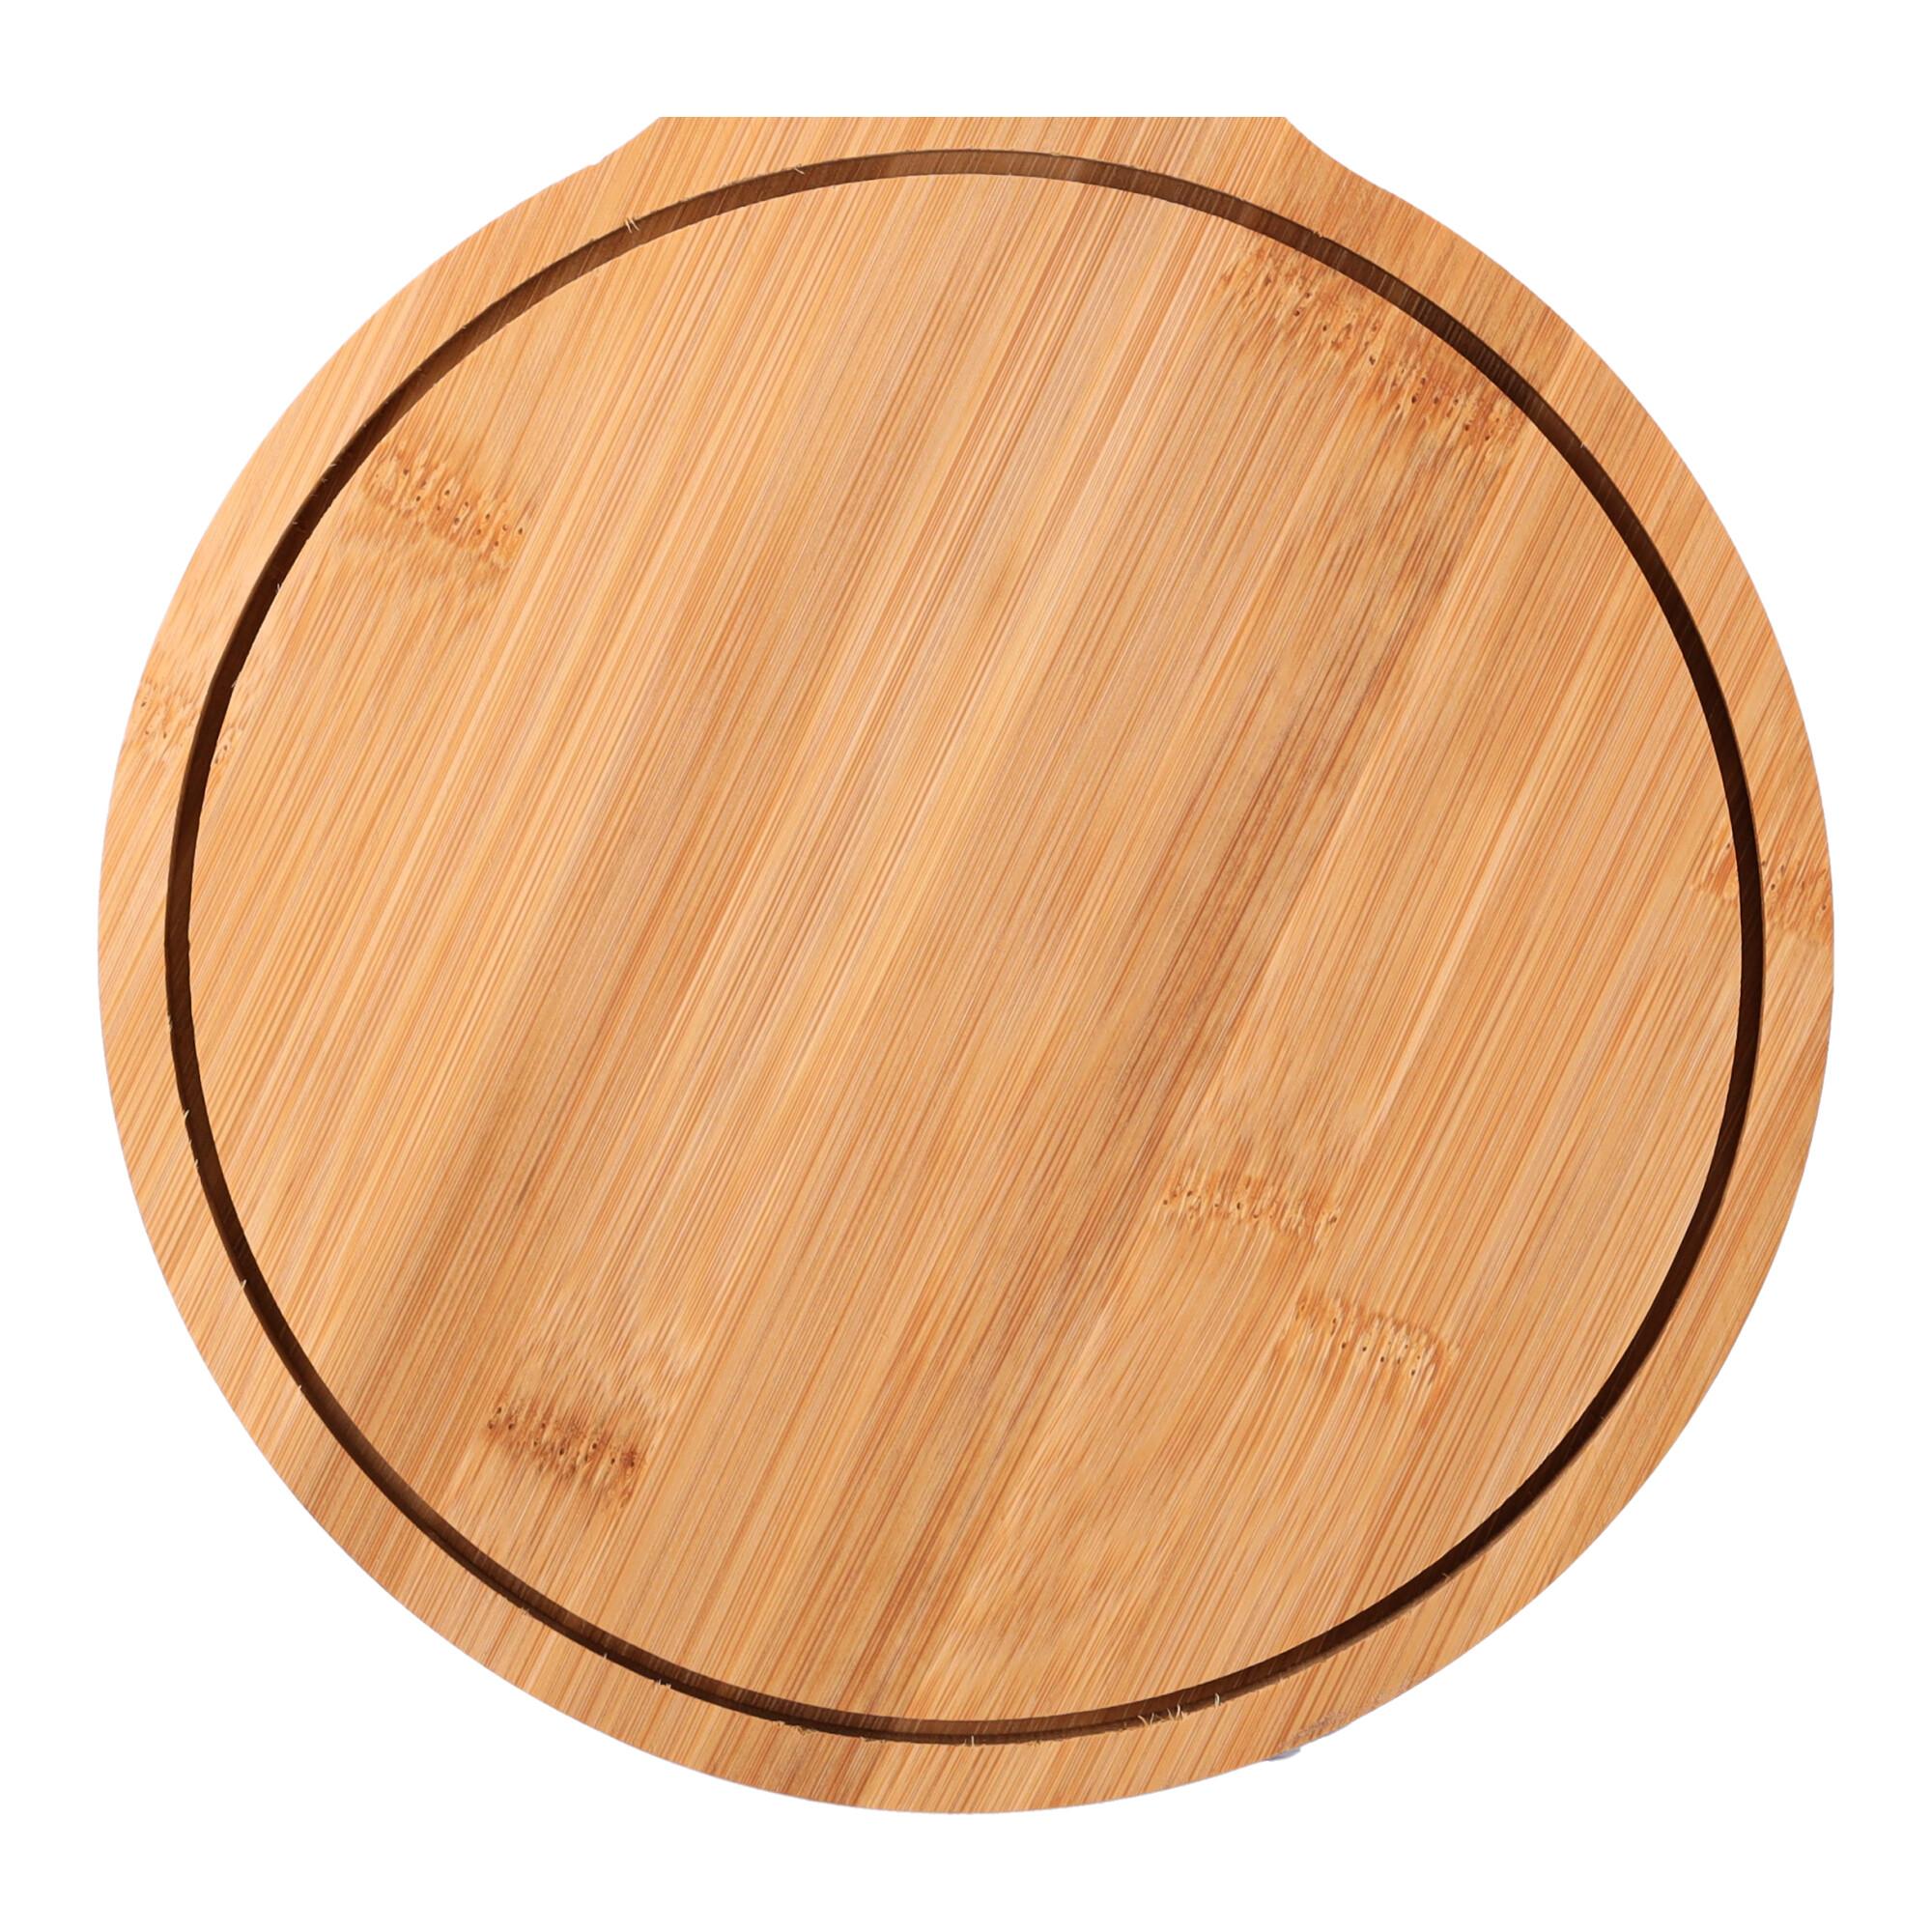 Wooden pizza board - round, size 35*23*1.2